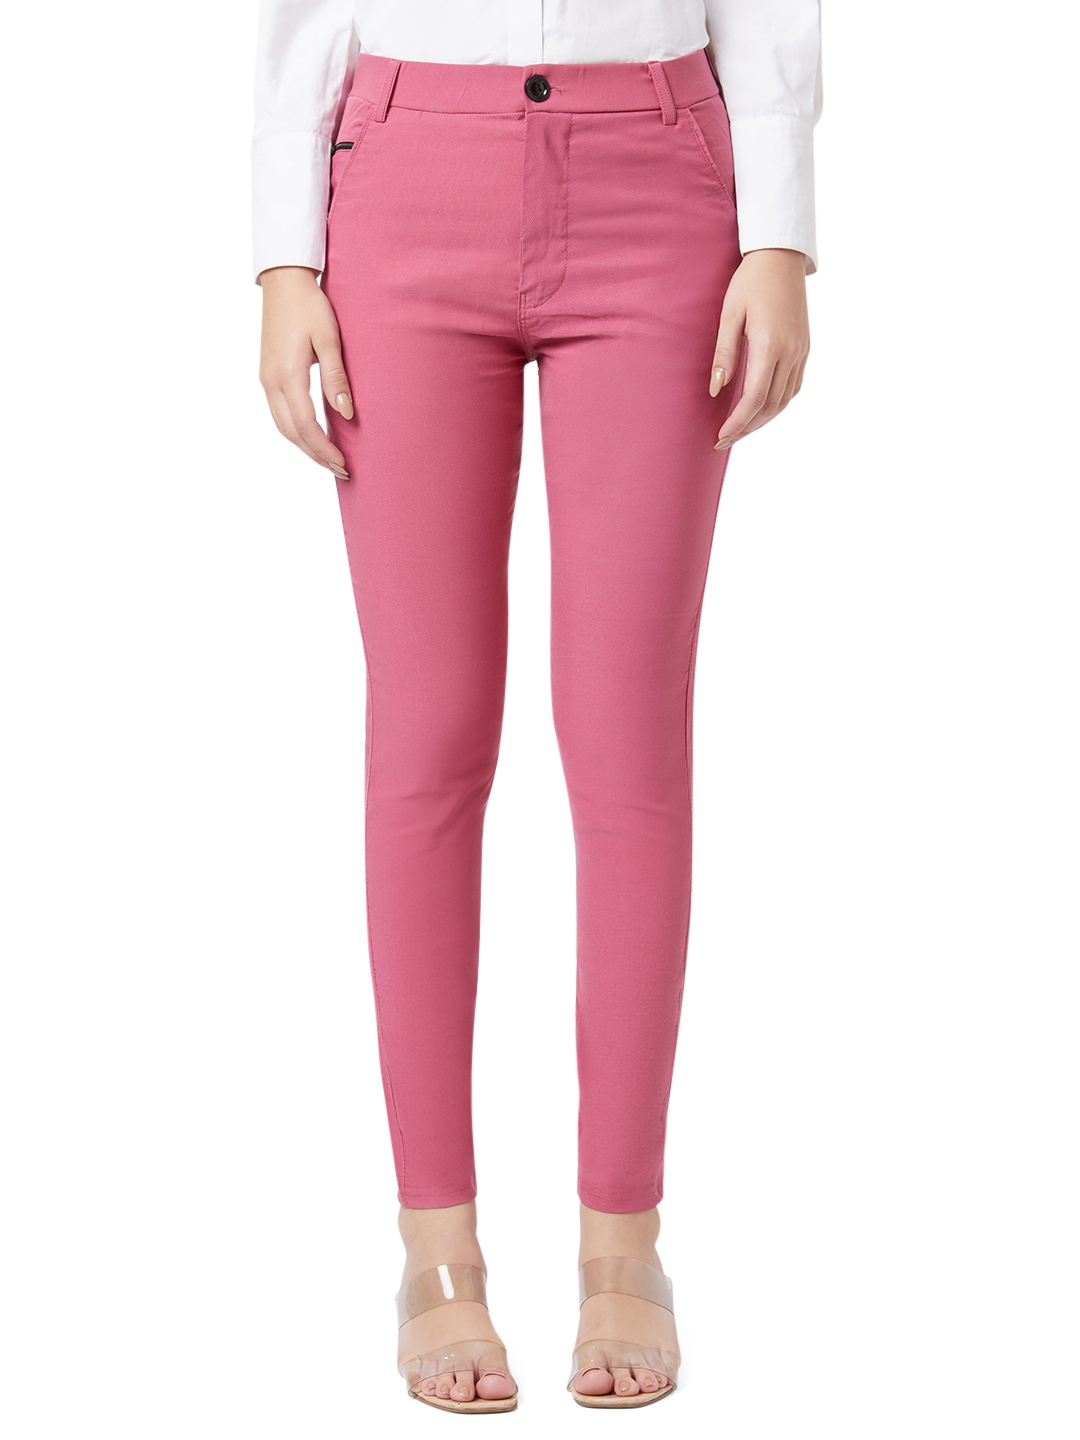 Ankle Length Jeans for Women  Buy Ankle Jeans for Women Online  Myntra